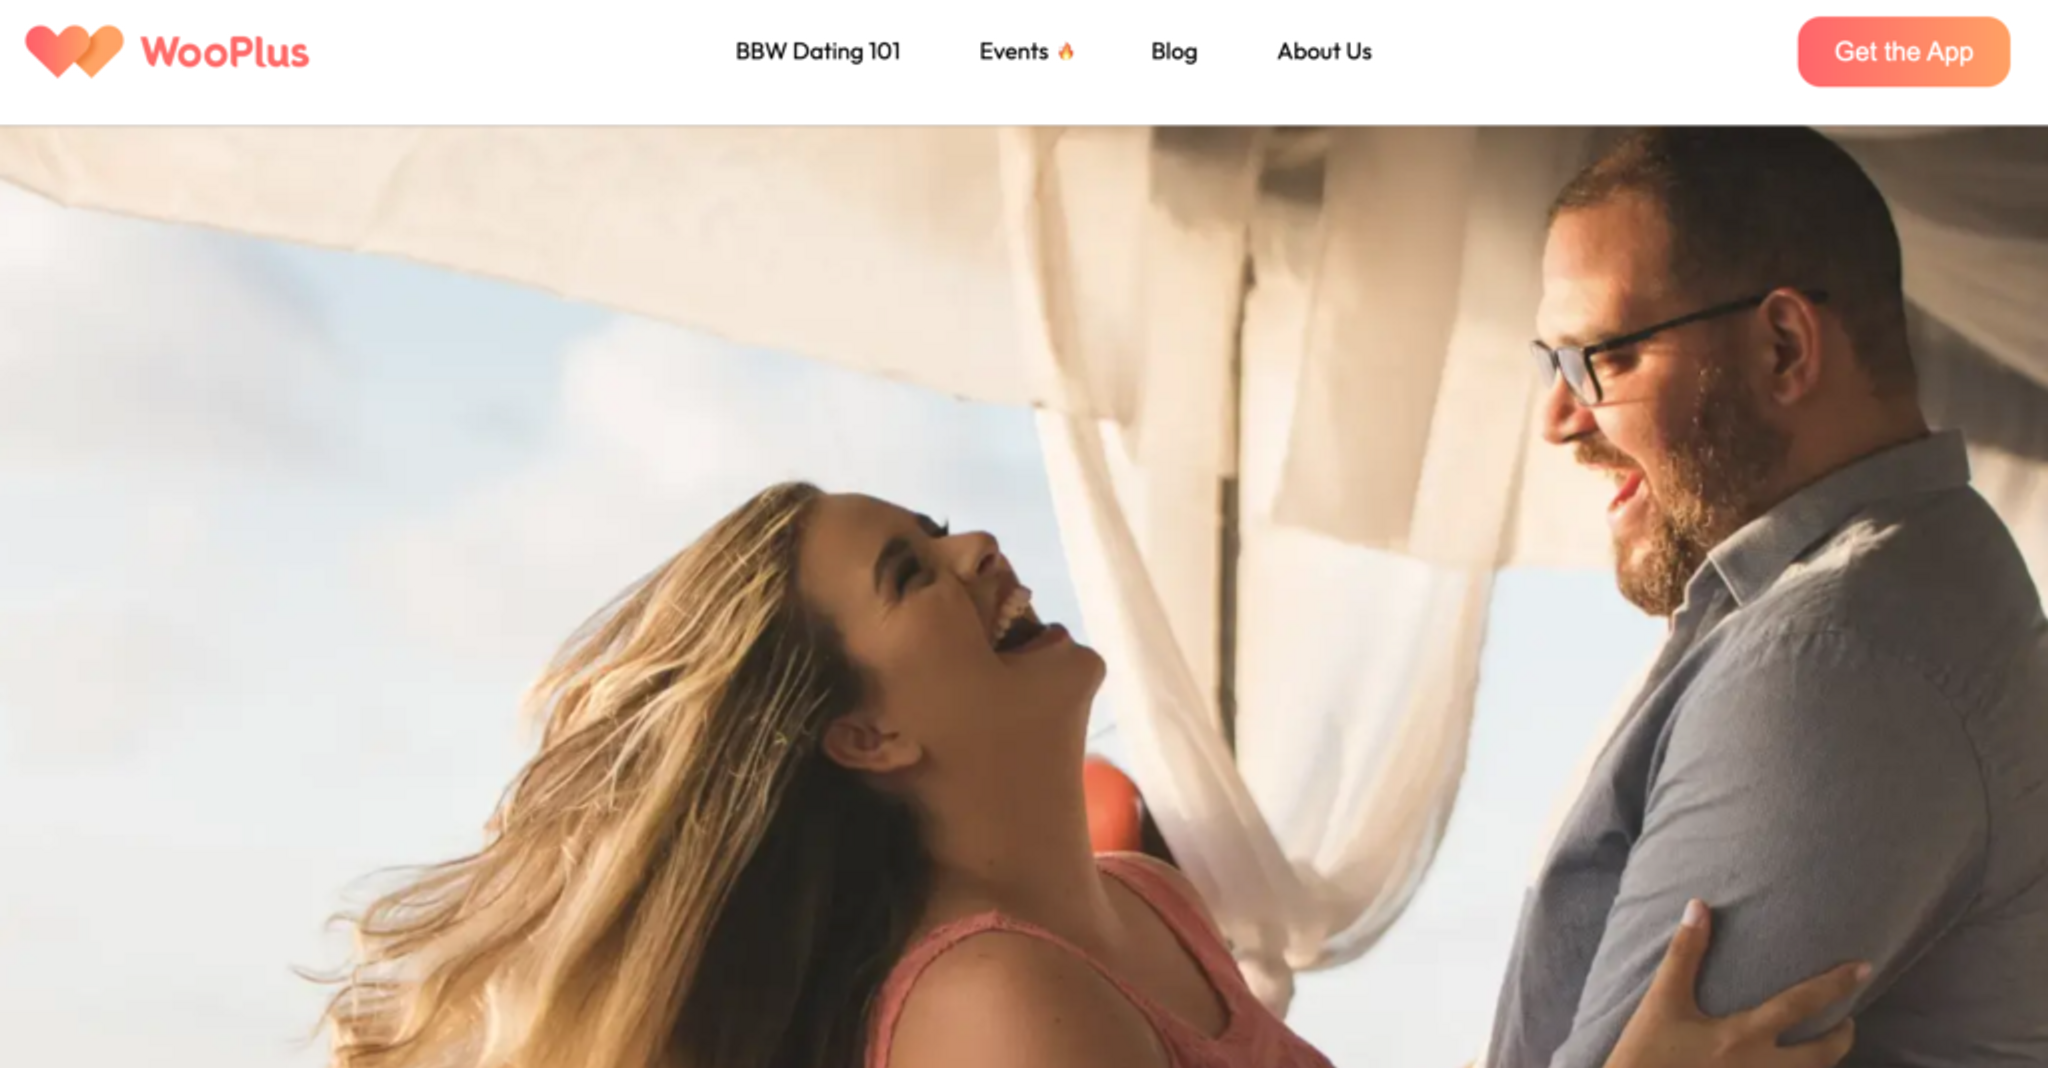 WooPlus, the most famous plus size dating app